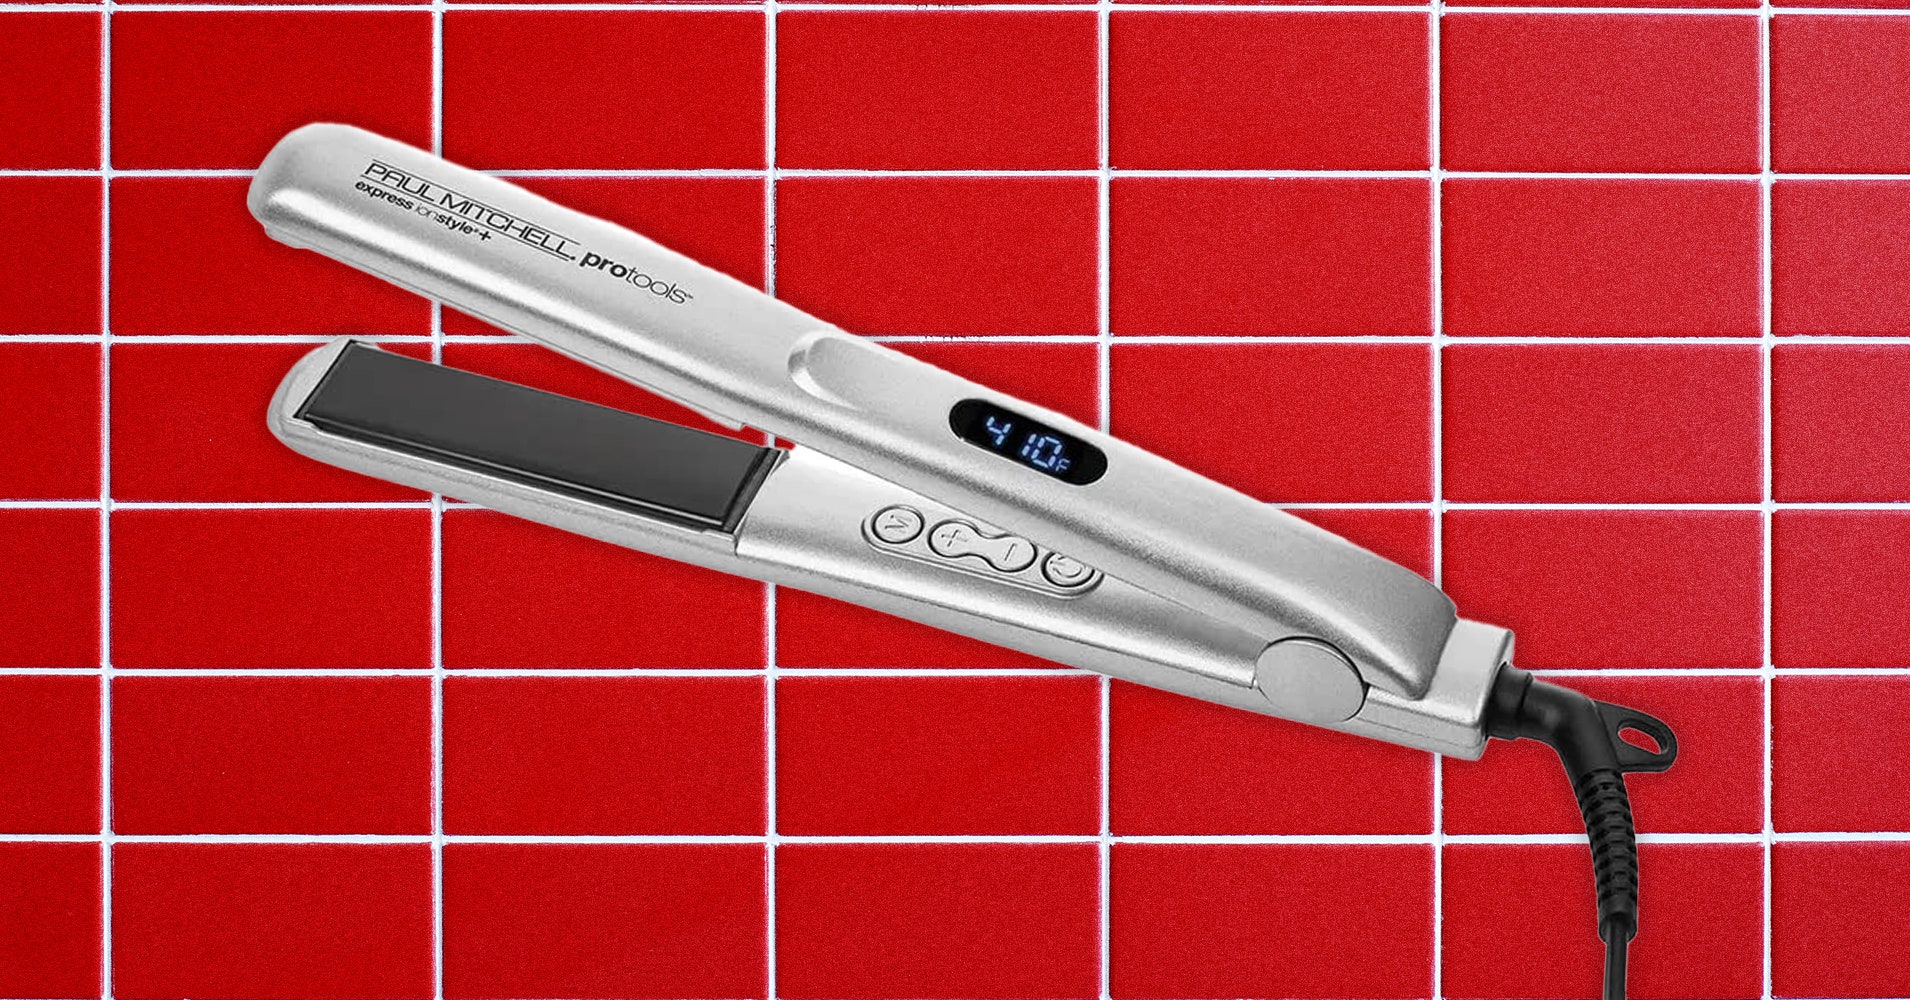 The 17 Best Hair Straighteners We Tested: Flat Irons, Hot Combs, and Straightening Brushes